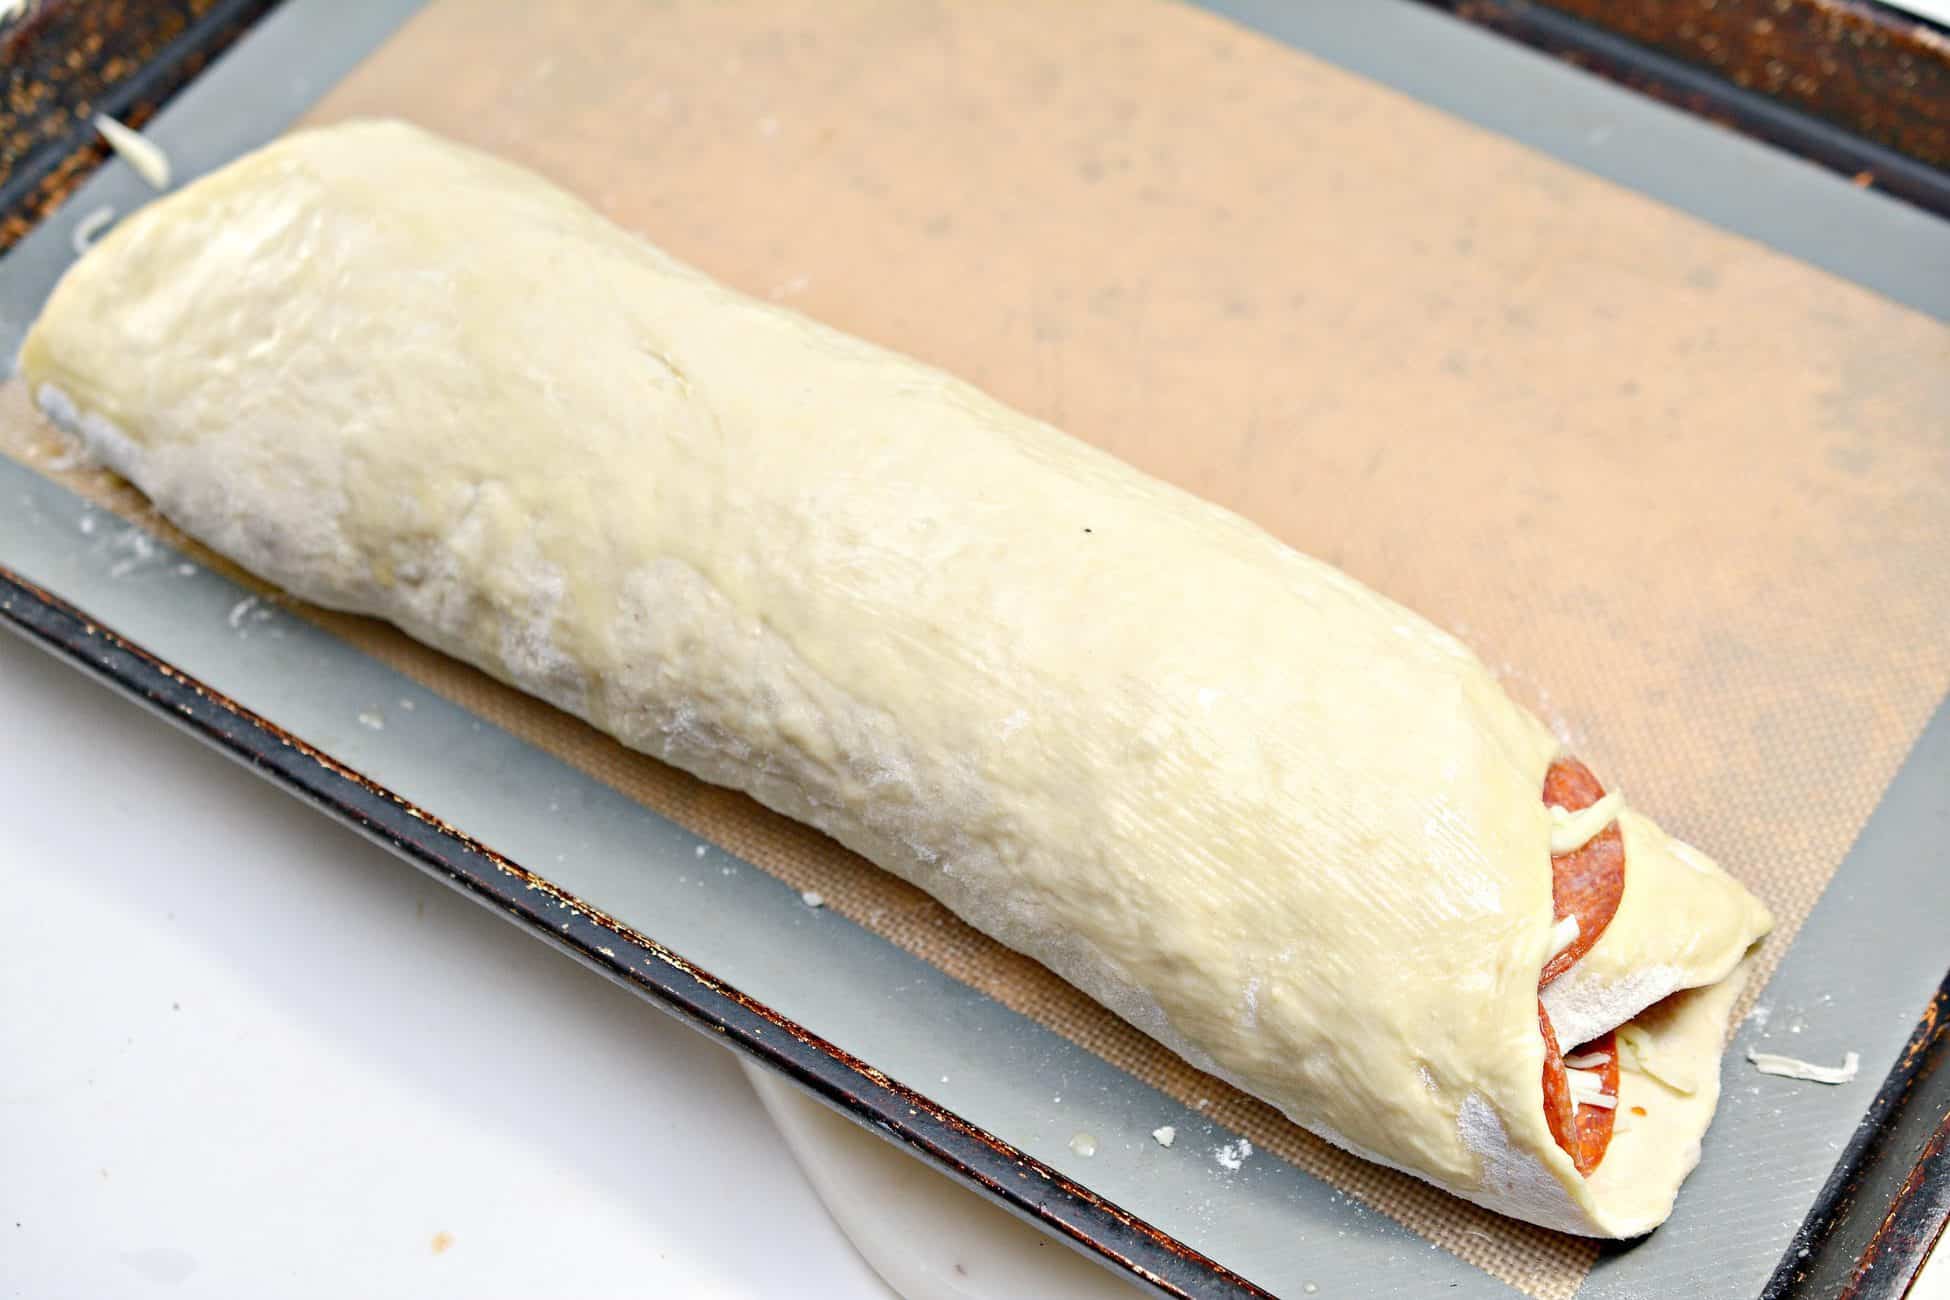 Starting at one end, roll the dough into a log with the cheese and pepperoni on the inside.